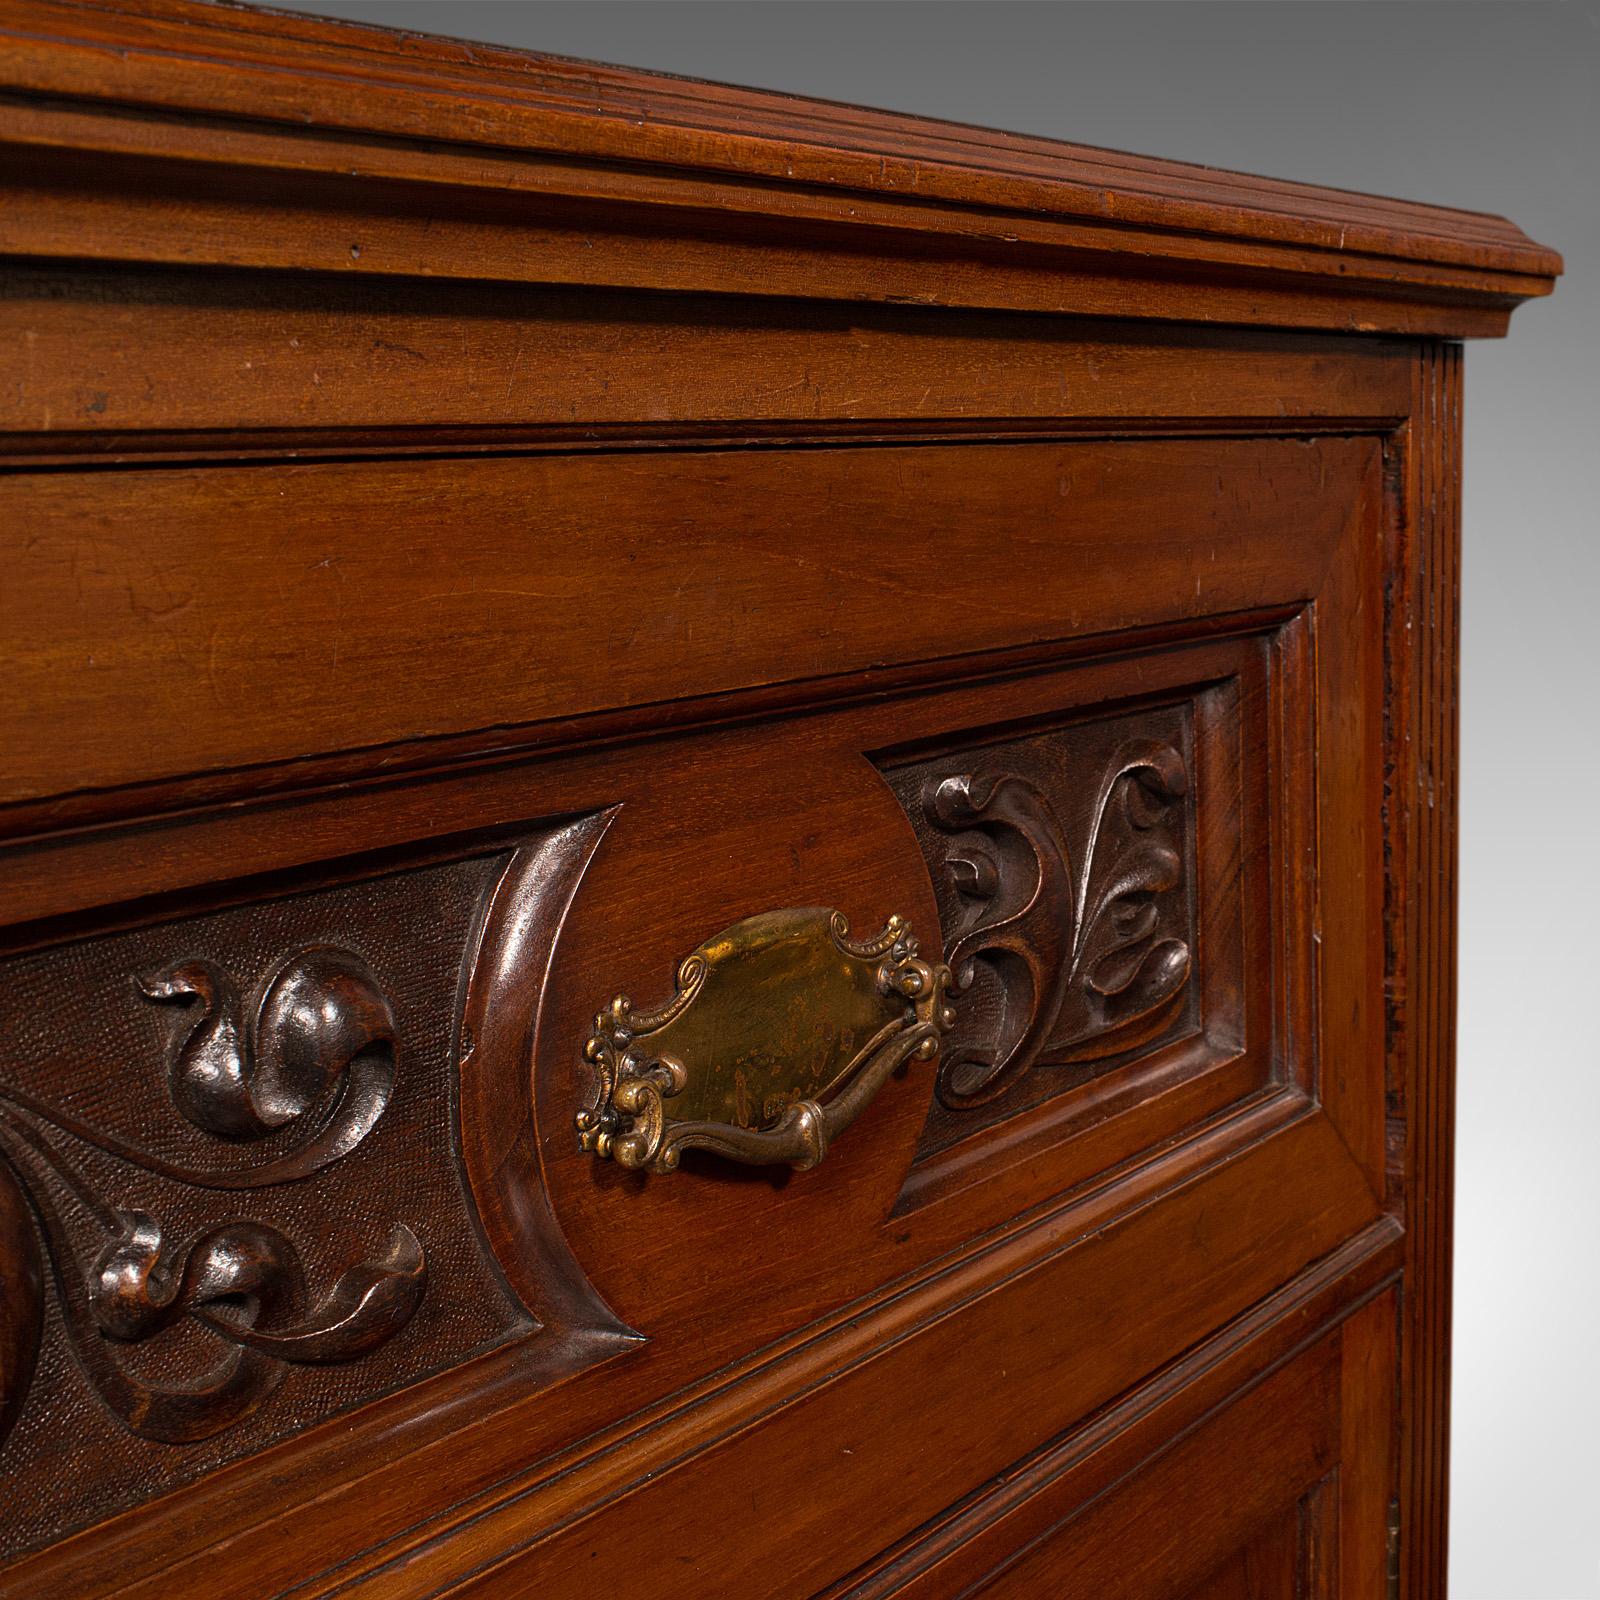 Antique Secretaire Sideboard, English, Correspondence Cabinet, Victorian, C.1900 For Sale 4